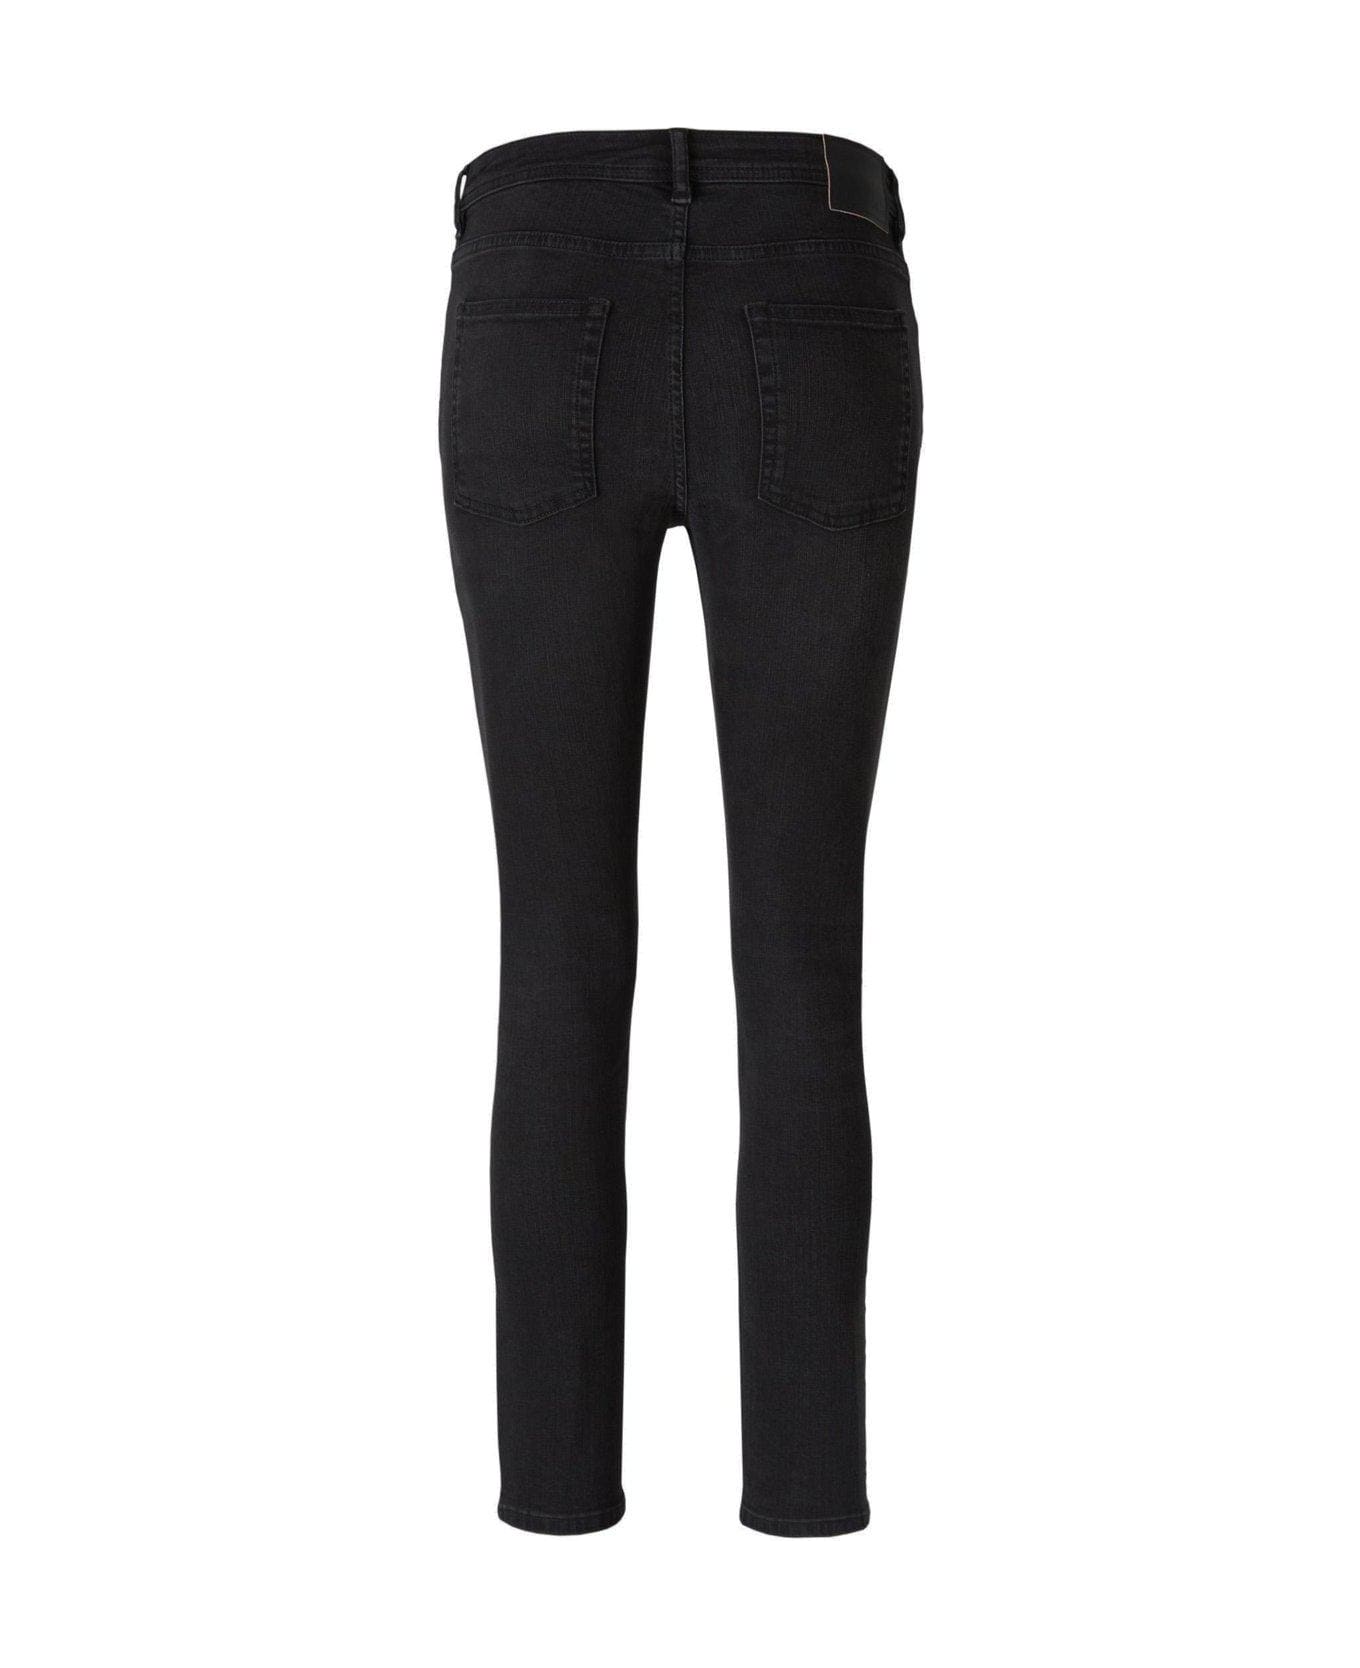 Acne Studios Fade Effect Mid-rise Skinny Jeans - Used black